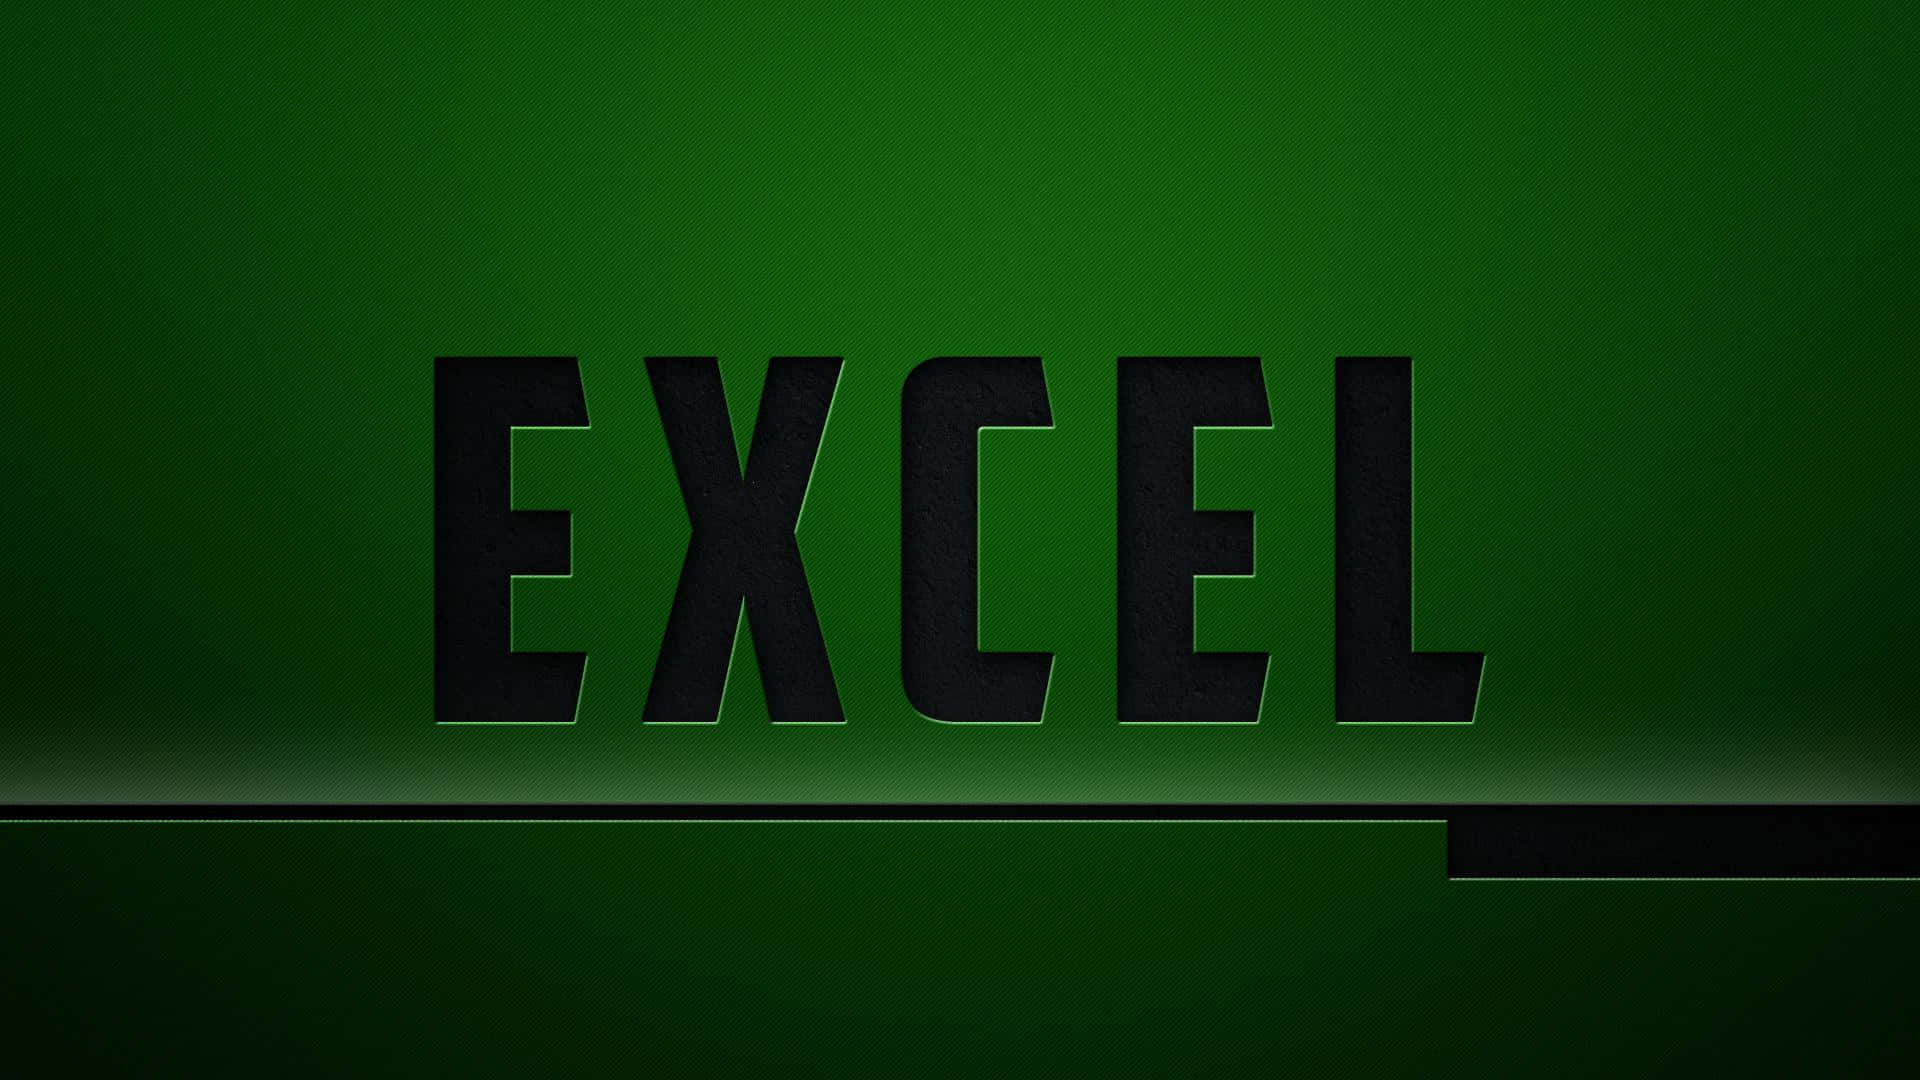 Exceltapeter - Hd